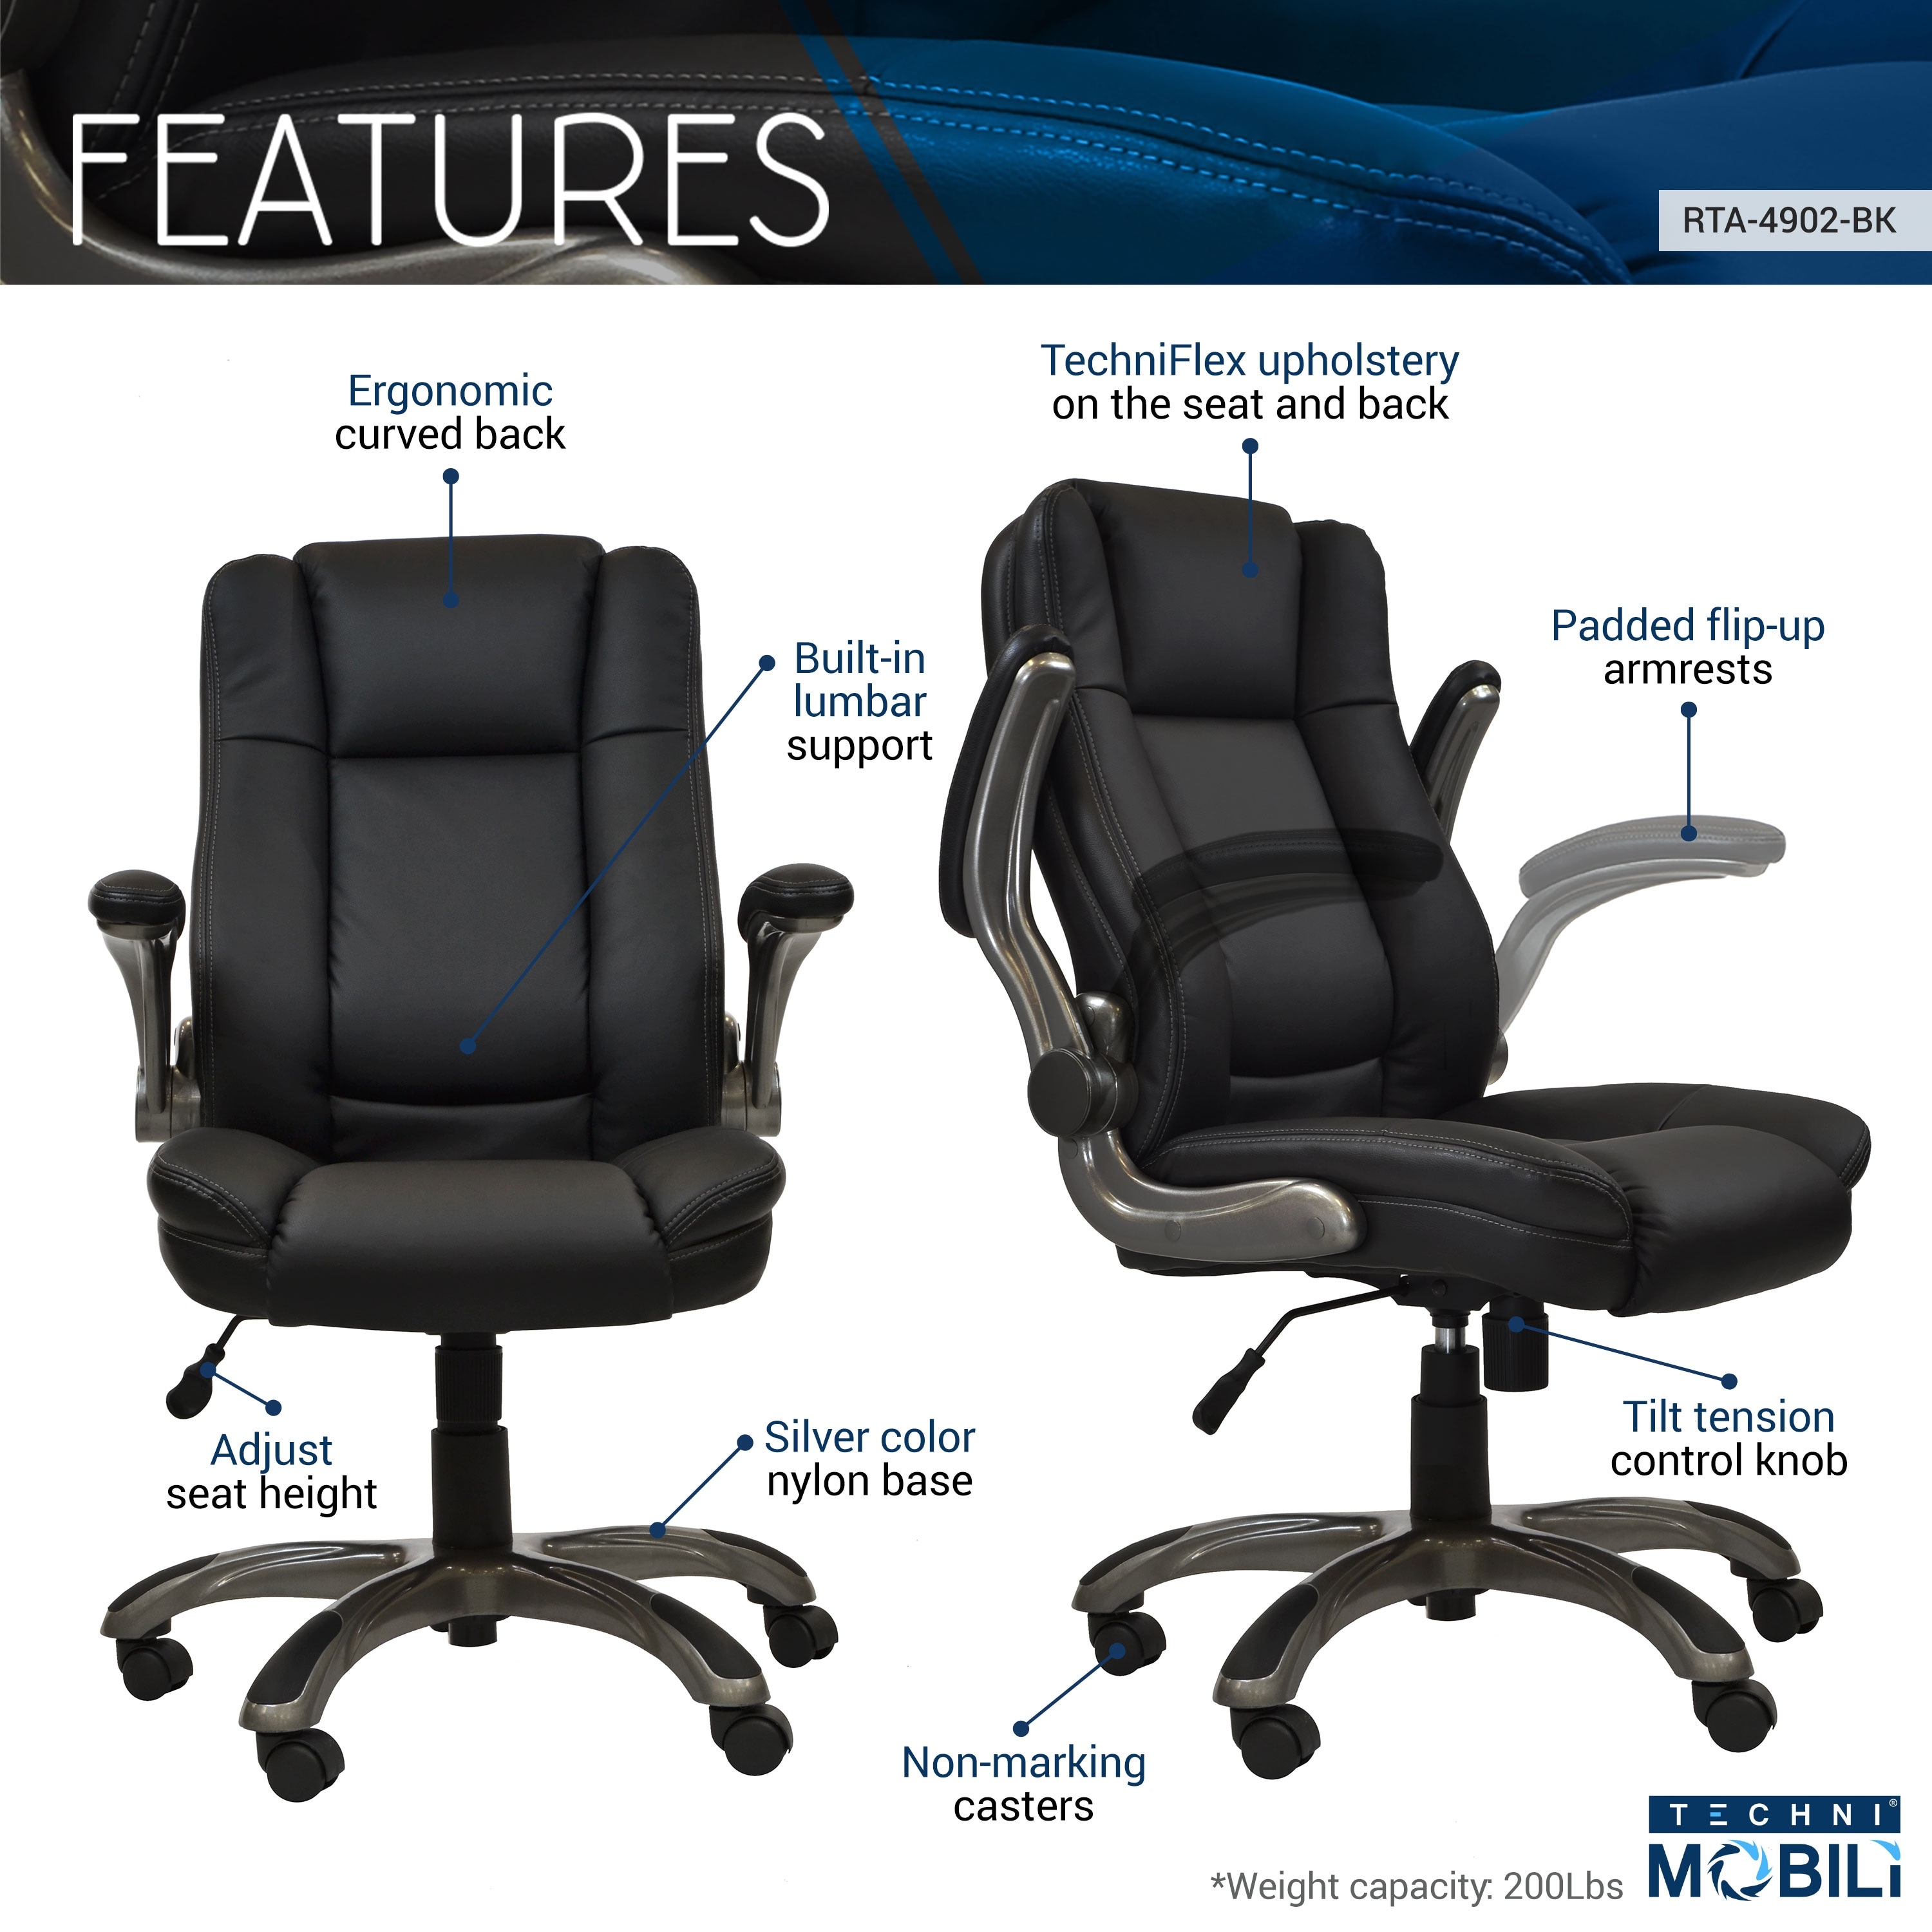 https://ak1.ostkcdn.com/images/products/is/images/direct/d0f12570ef3abc1a8c5f455a519f894639b1918c/Executive-Office-Computer-Desk-Chair-with-Armrests%2C-Ergonomic-Chair-with-Adjustable-Height-%26-Tilt-Angle-Home-Office-Desk-Chairs.jpg